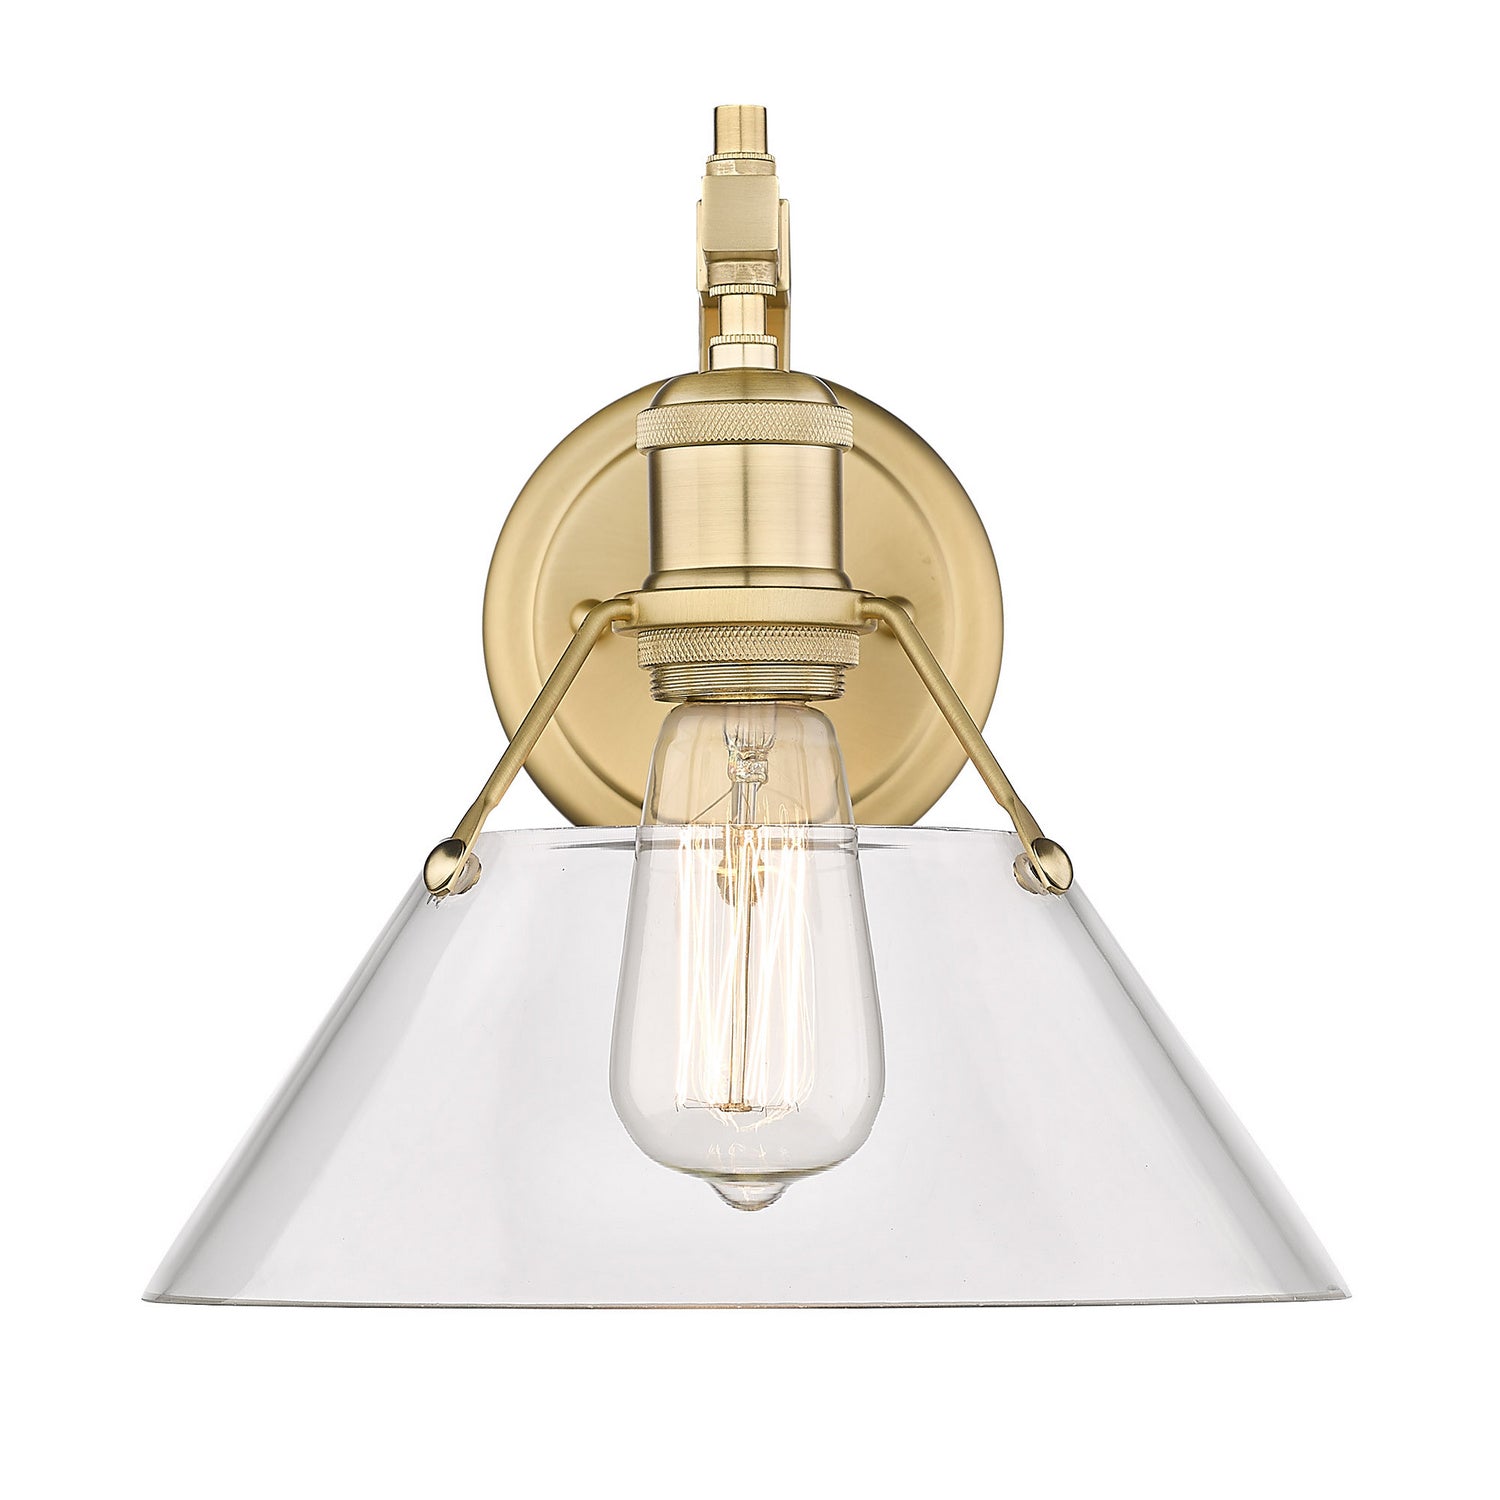 Golden - 3306-1W BCB-CLR - One Light Wall Sconce - Orwell BCB - Brushed Champagne Bronze